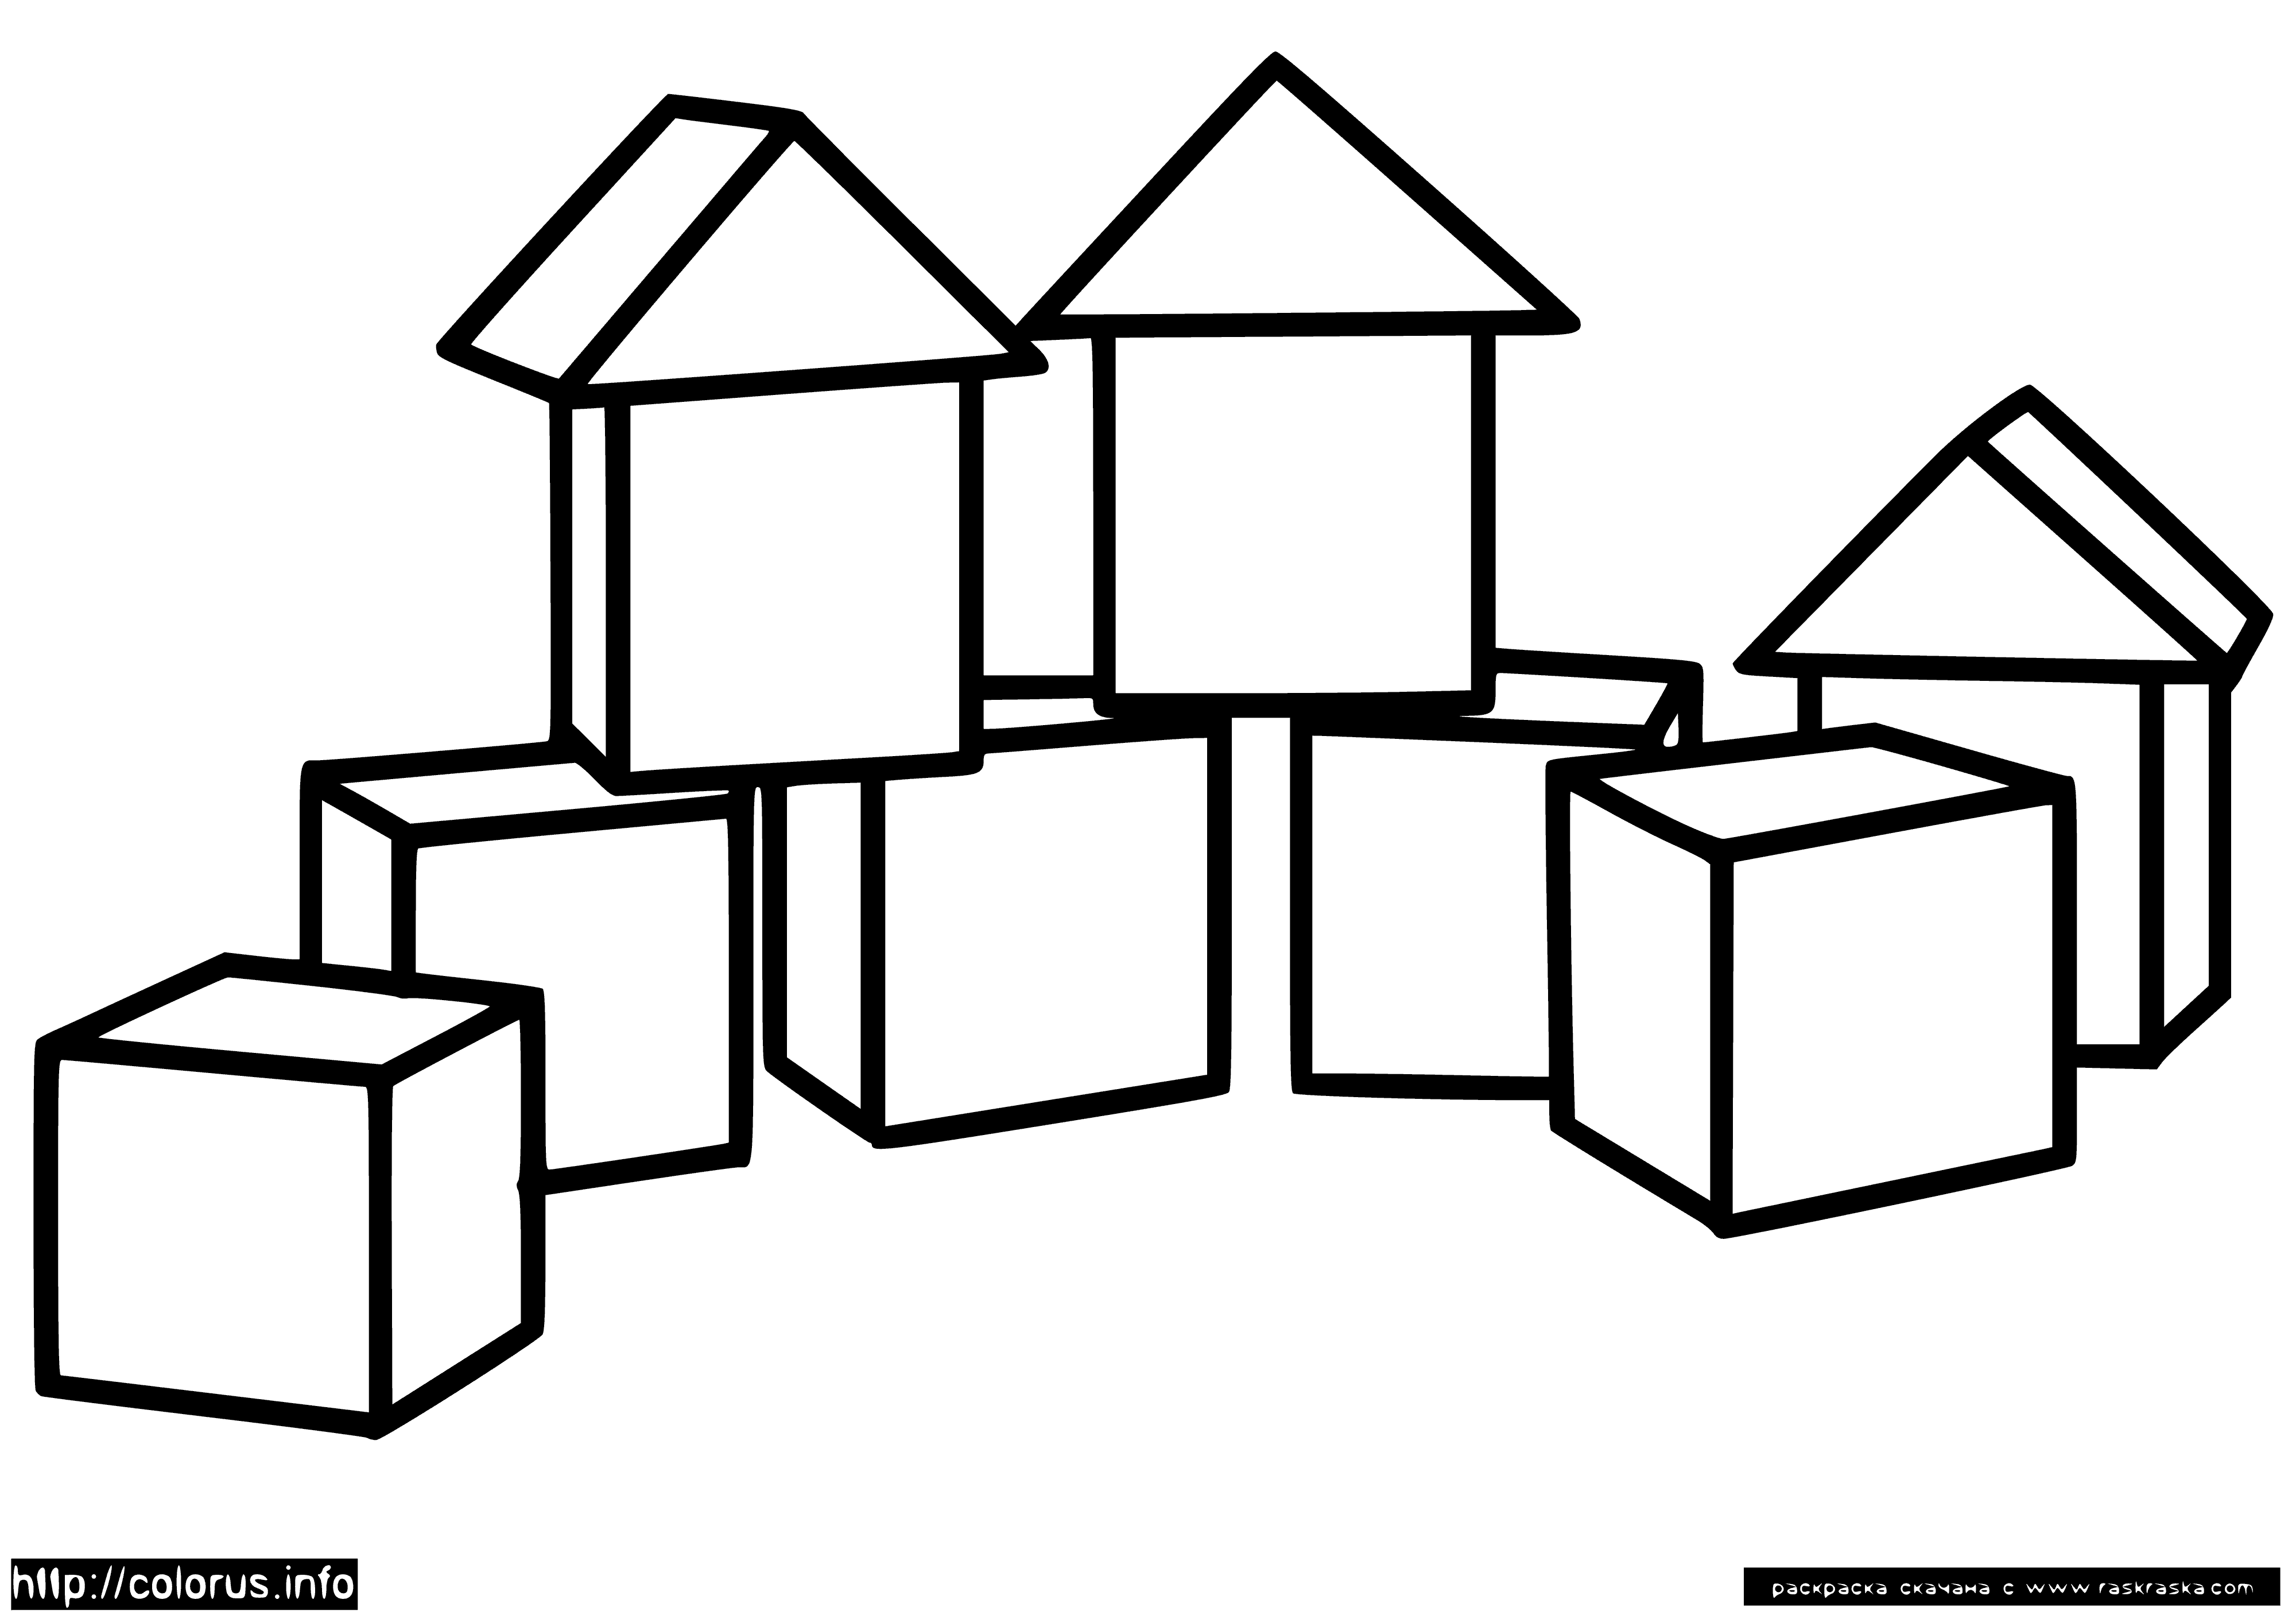 Cubes coloring page